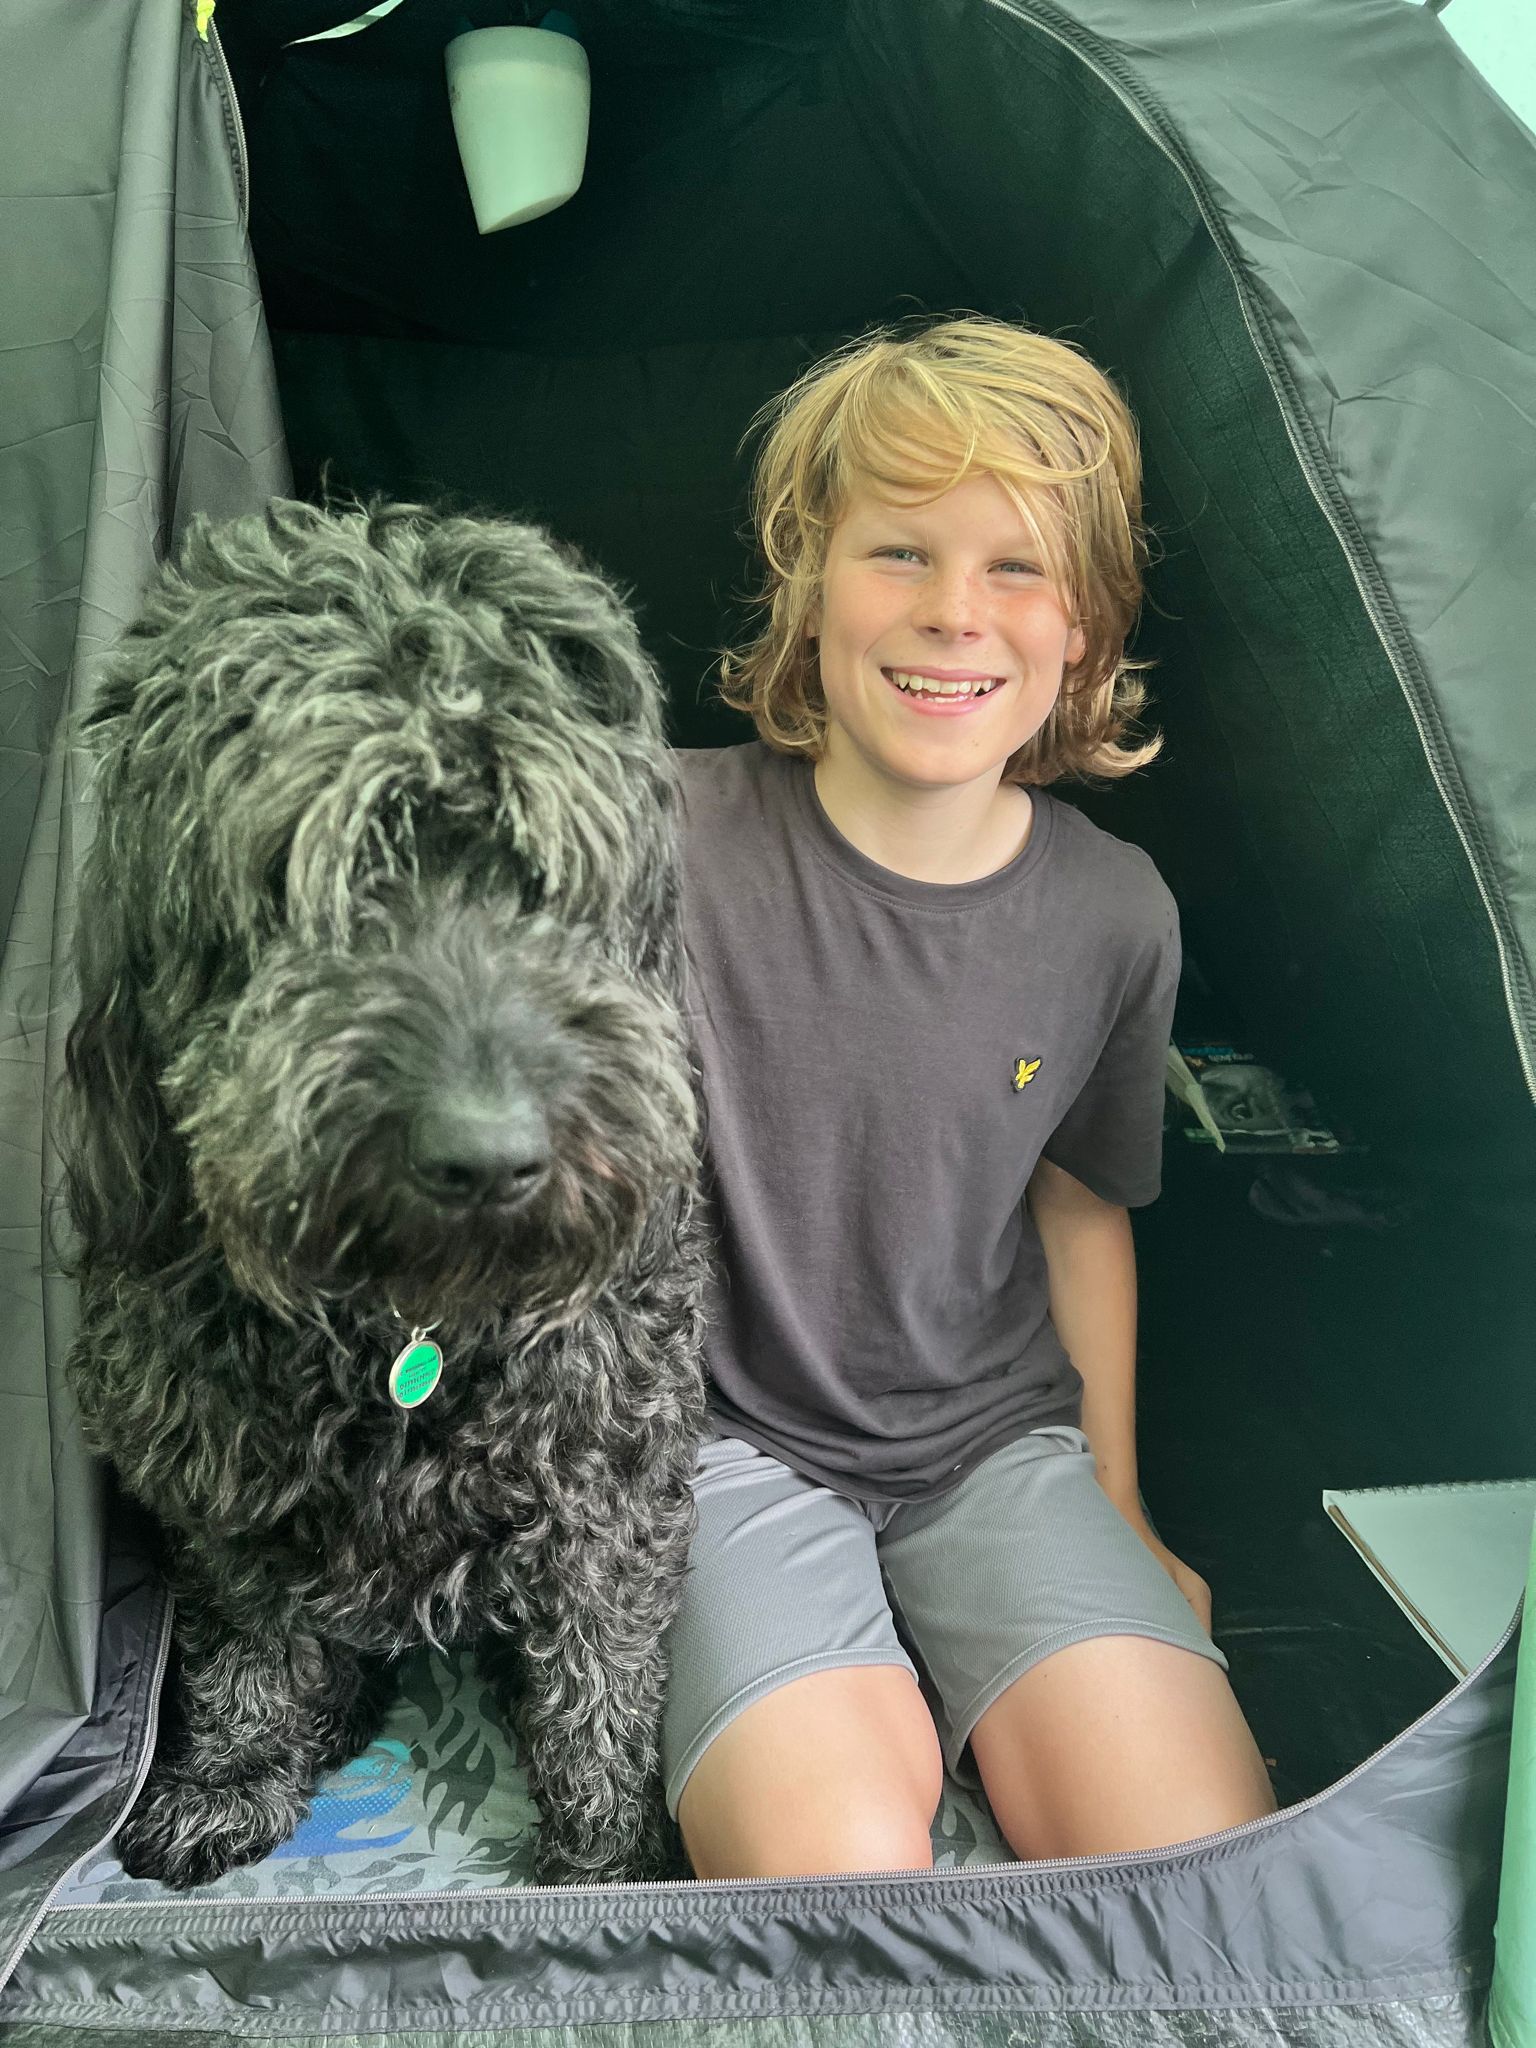 Billy sitting inside his tent with his dog 